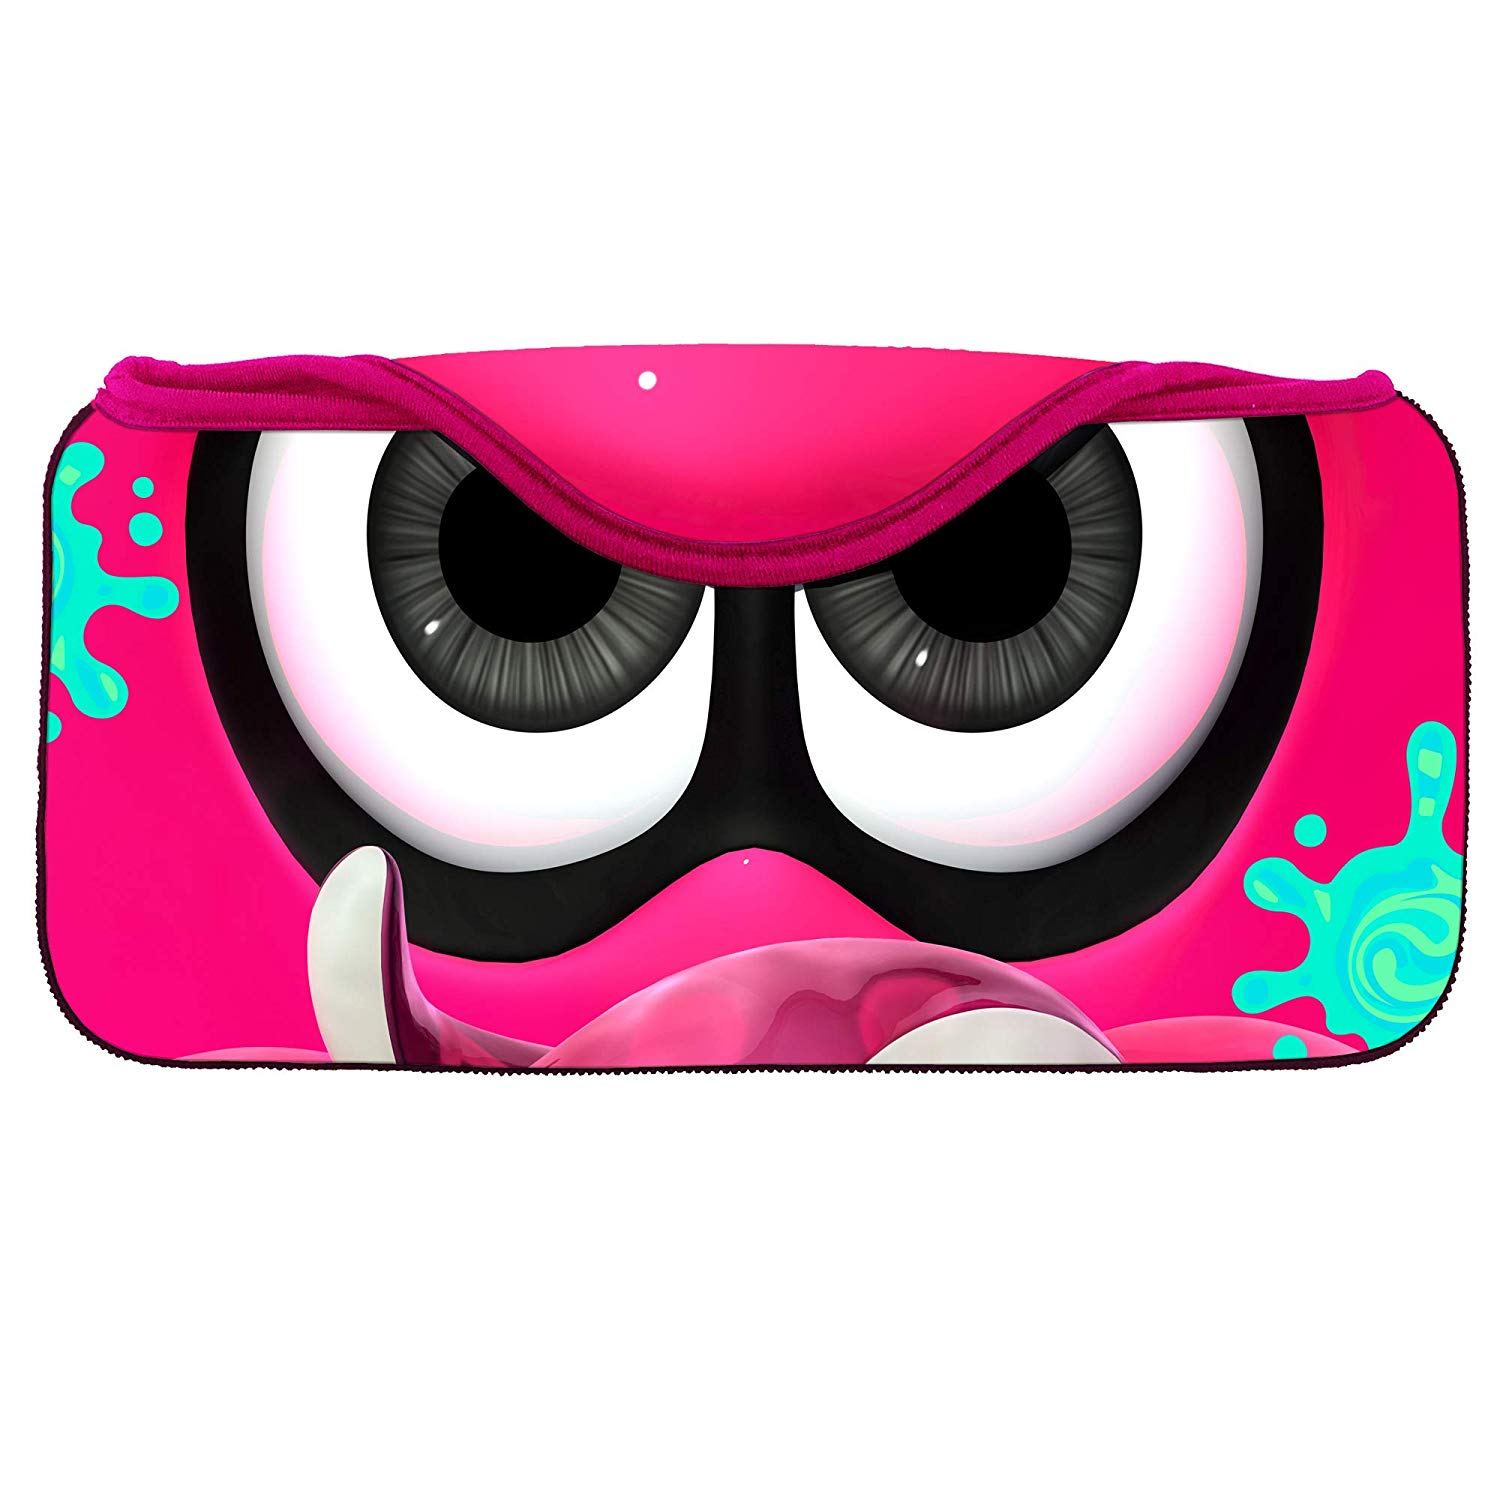 Splatoon 2 Quick Pouch Collection For Nintendo Switch Octoling